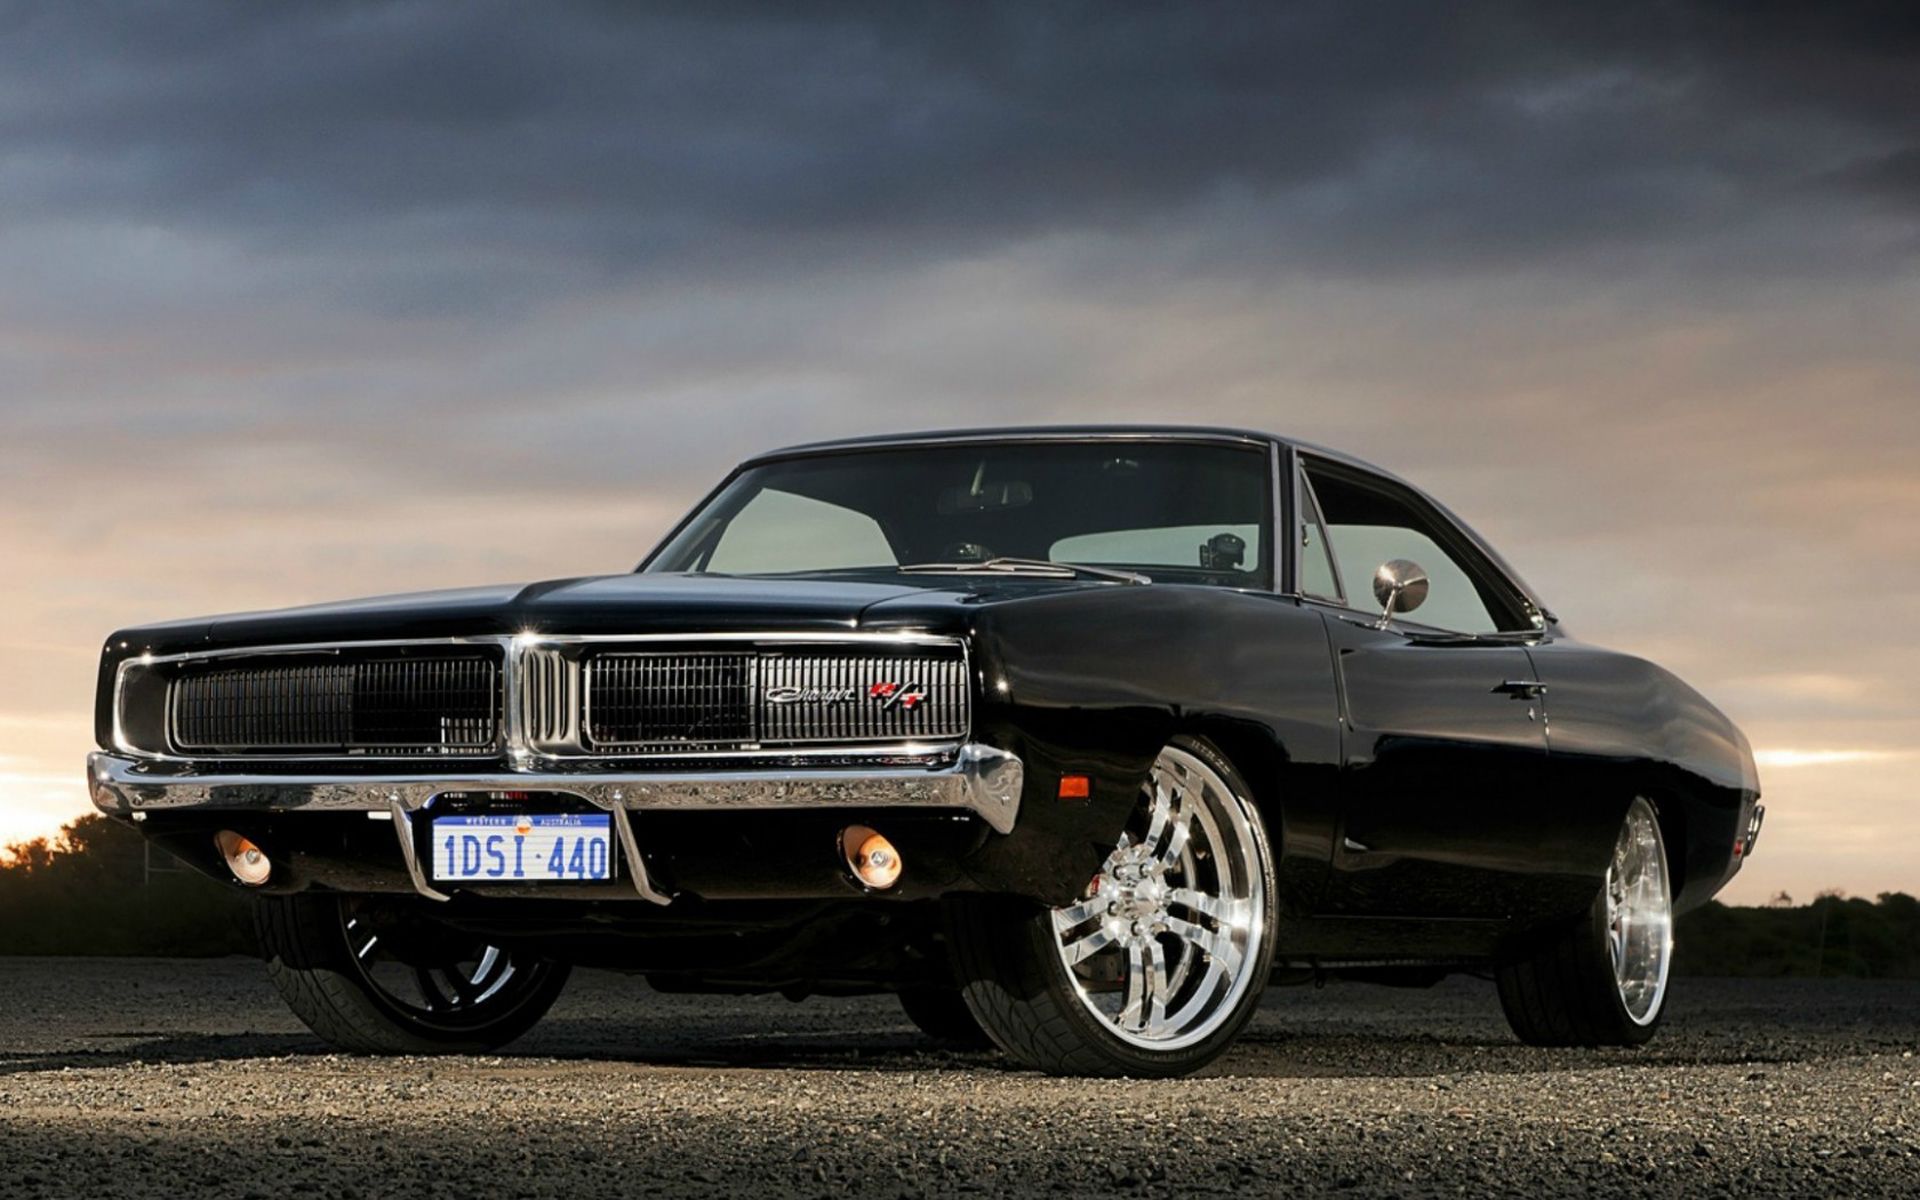 68 Dodge Charger Wallpaper 5 dodge charger srt hd wallpapers